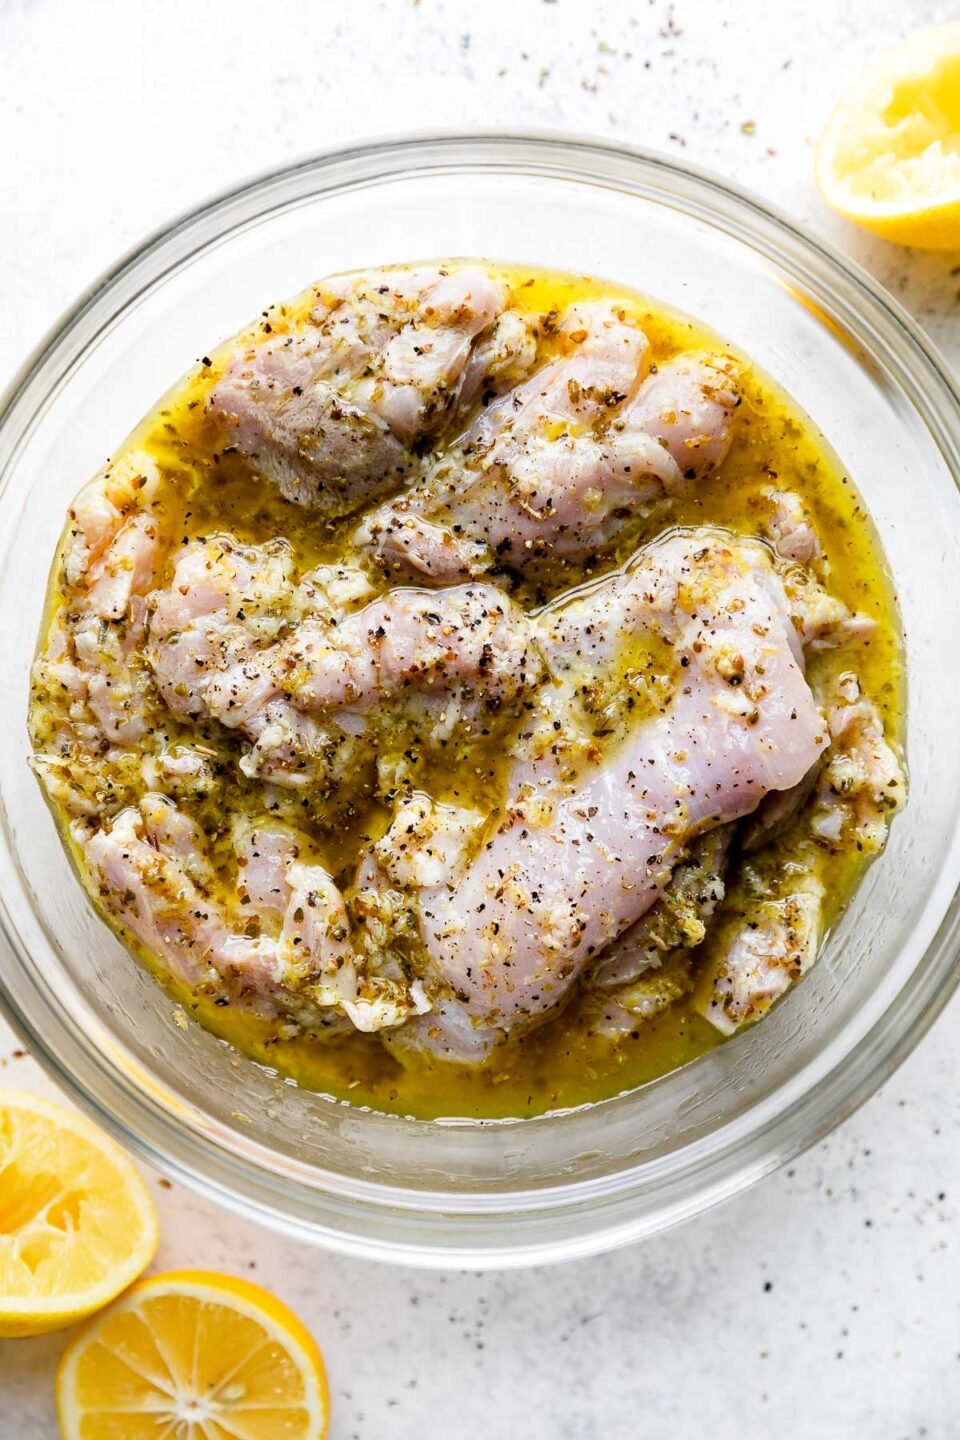 Boneless skinless chicken thighs rest in a glass mixing bowl of Lemony Greek marinade. The bowl sits atop a creamy white textured surface. Halved lemons rest on the surface surrounding the bowl with the exposed fruit facing upwards.